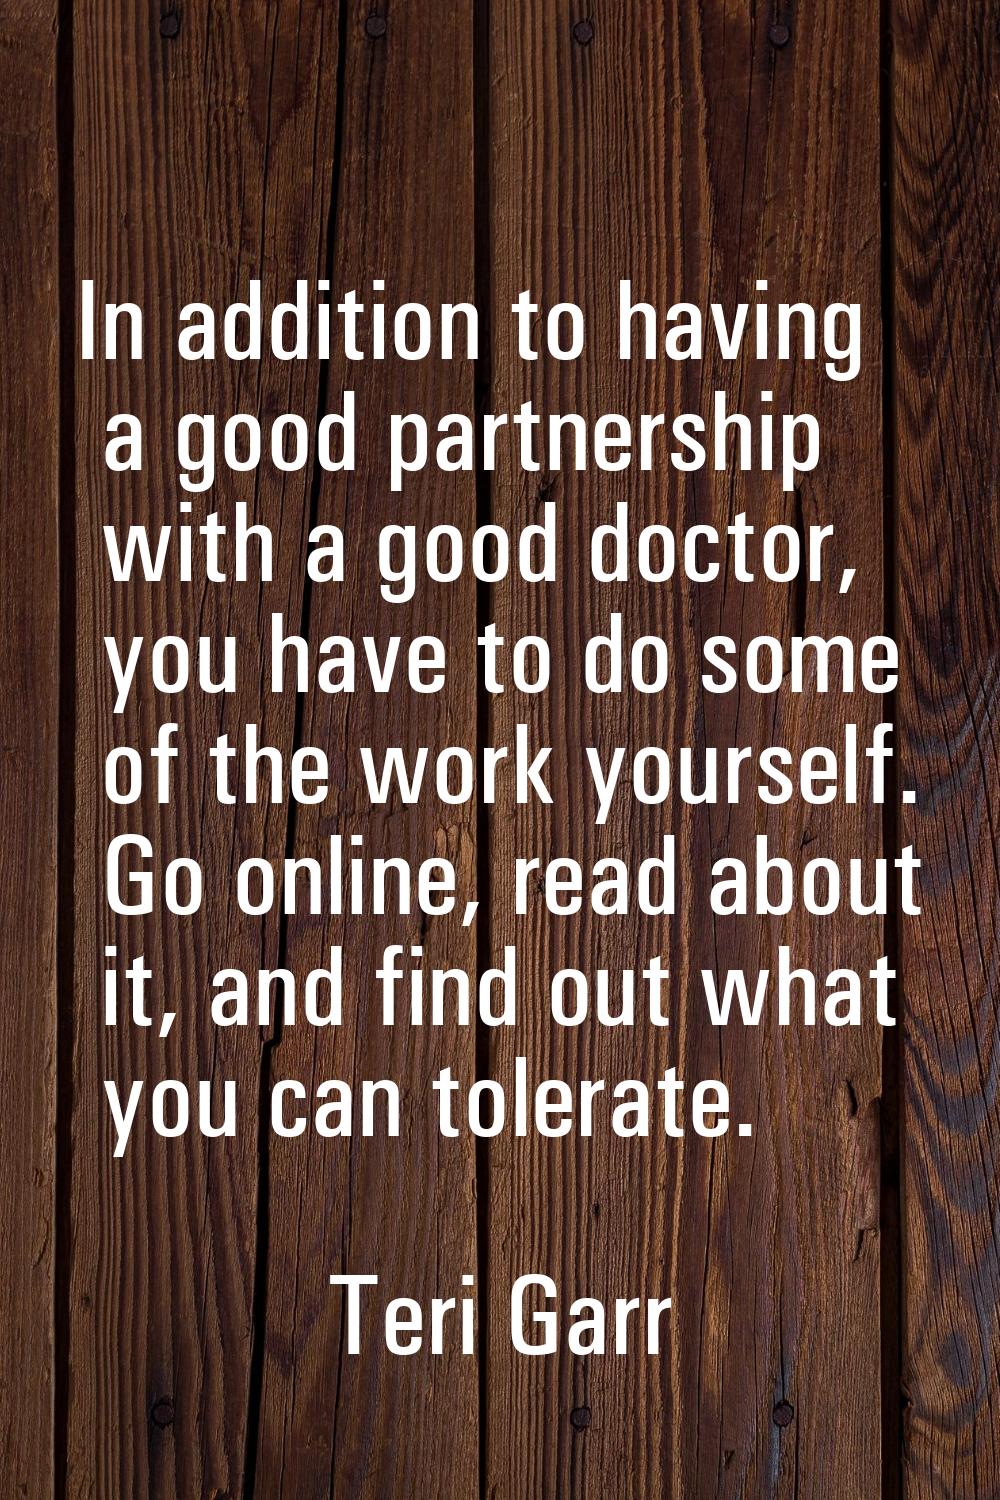 In addition to having a good partnership with a good doctor, you have to do some of the work yourse